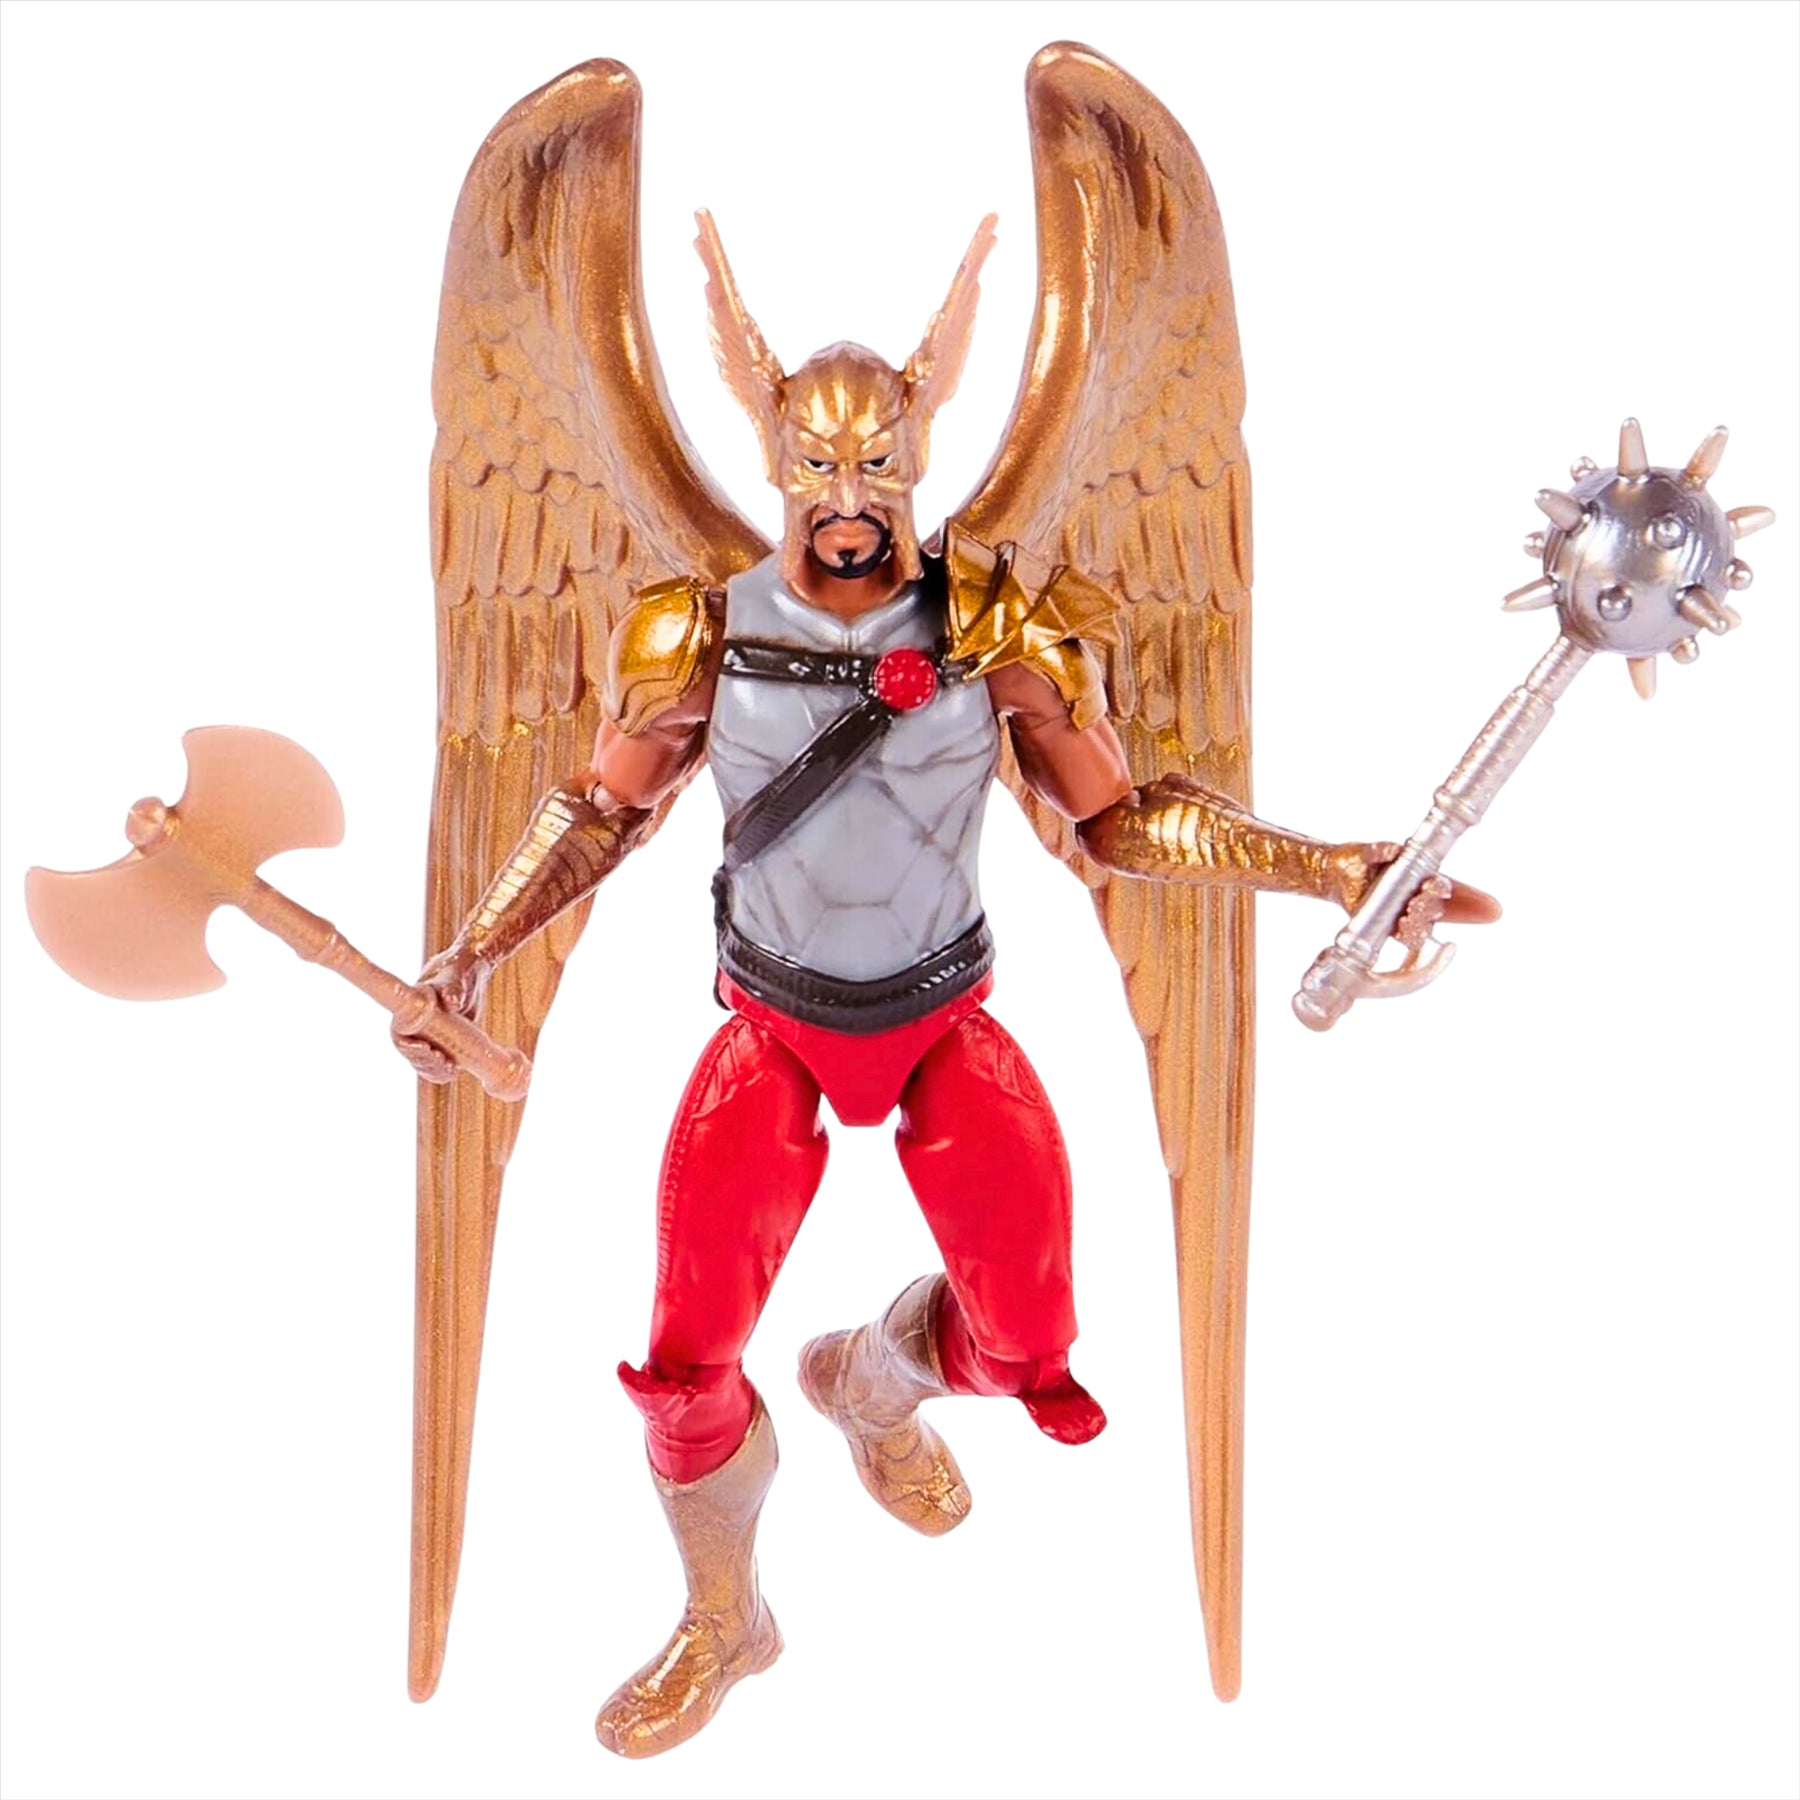 DC Comics Black Adam Movie Collectible Hawkman 10cm Articulated Action Figure with Accessories